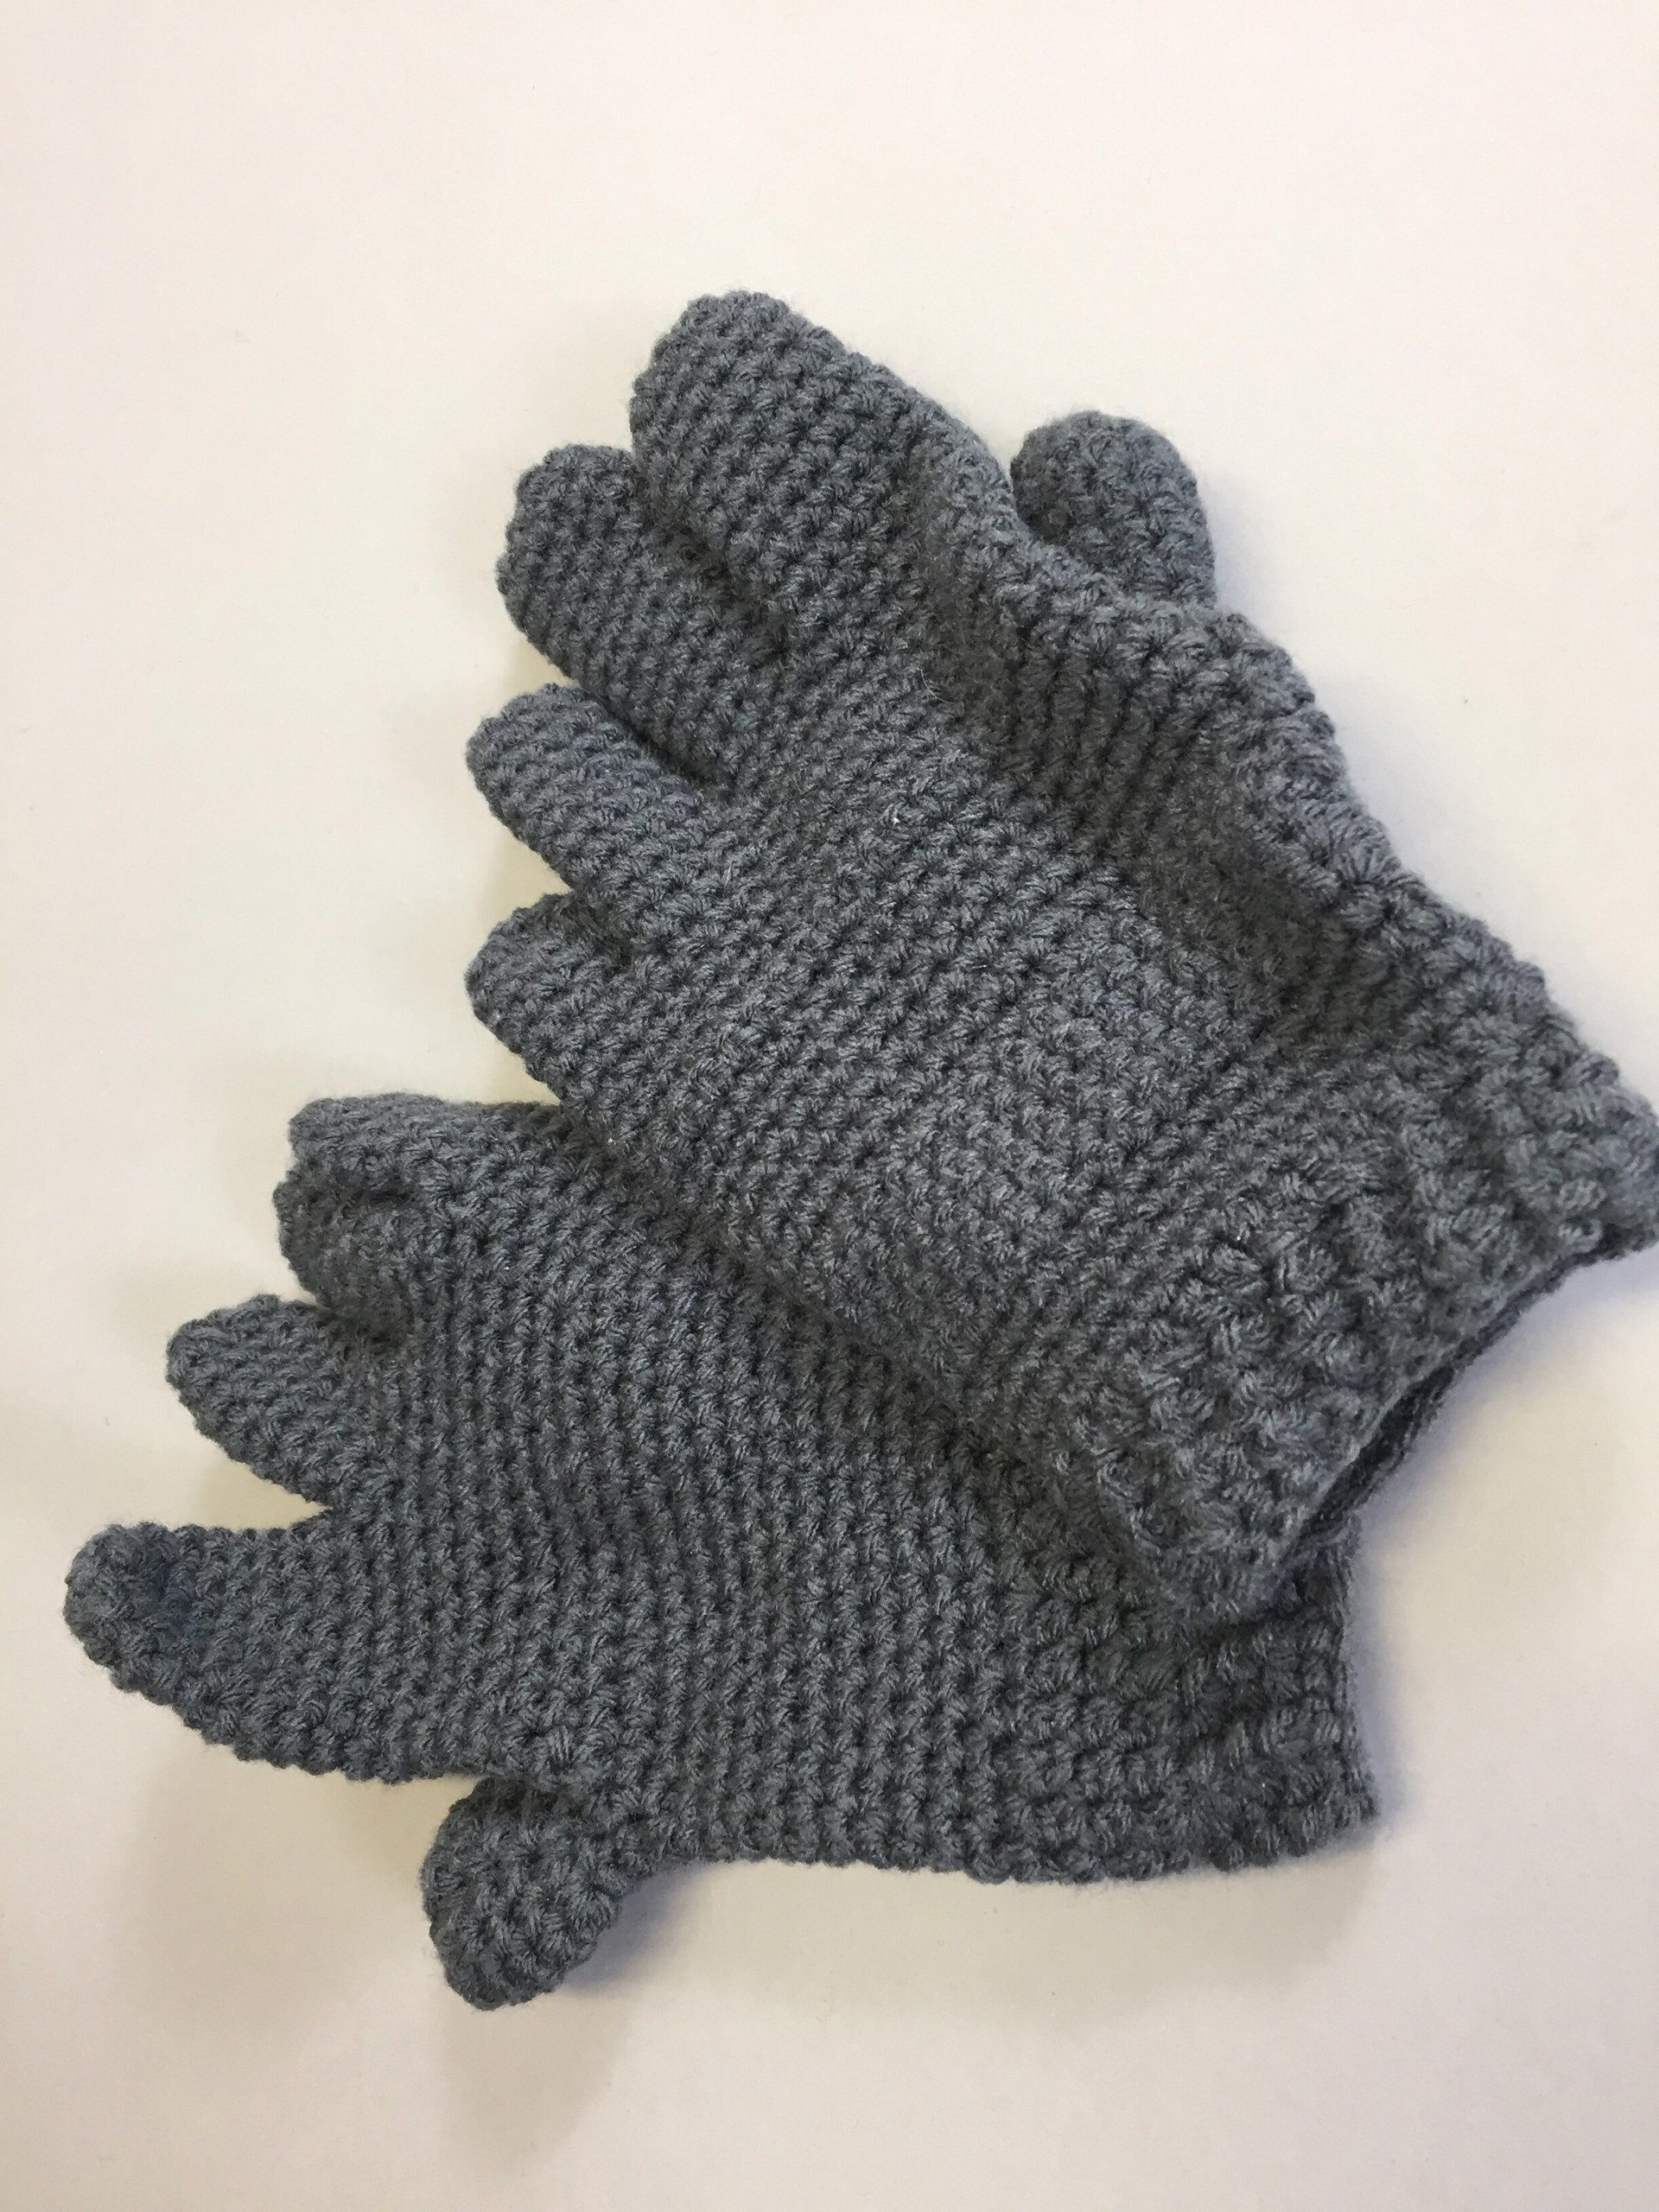 Charcoal Gloves by Lee Woodring